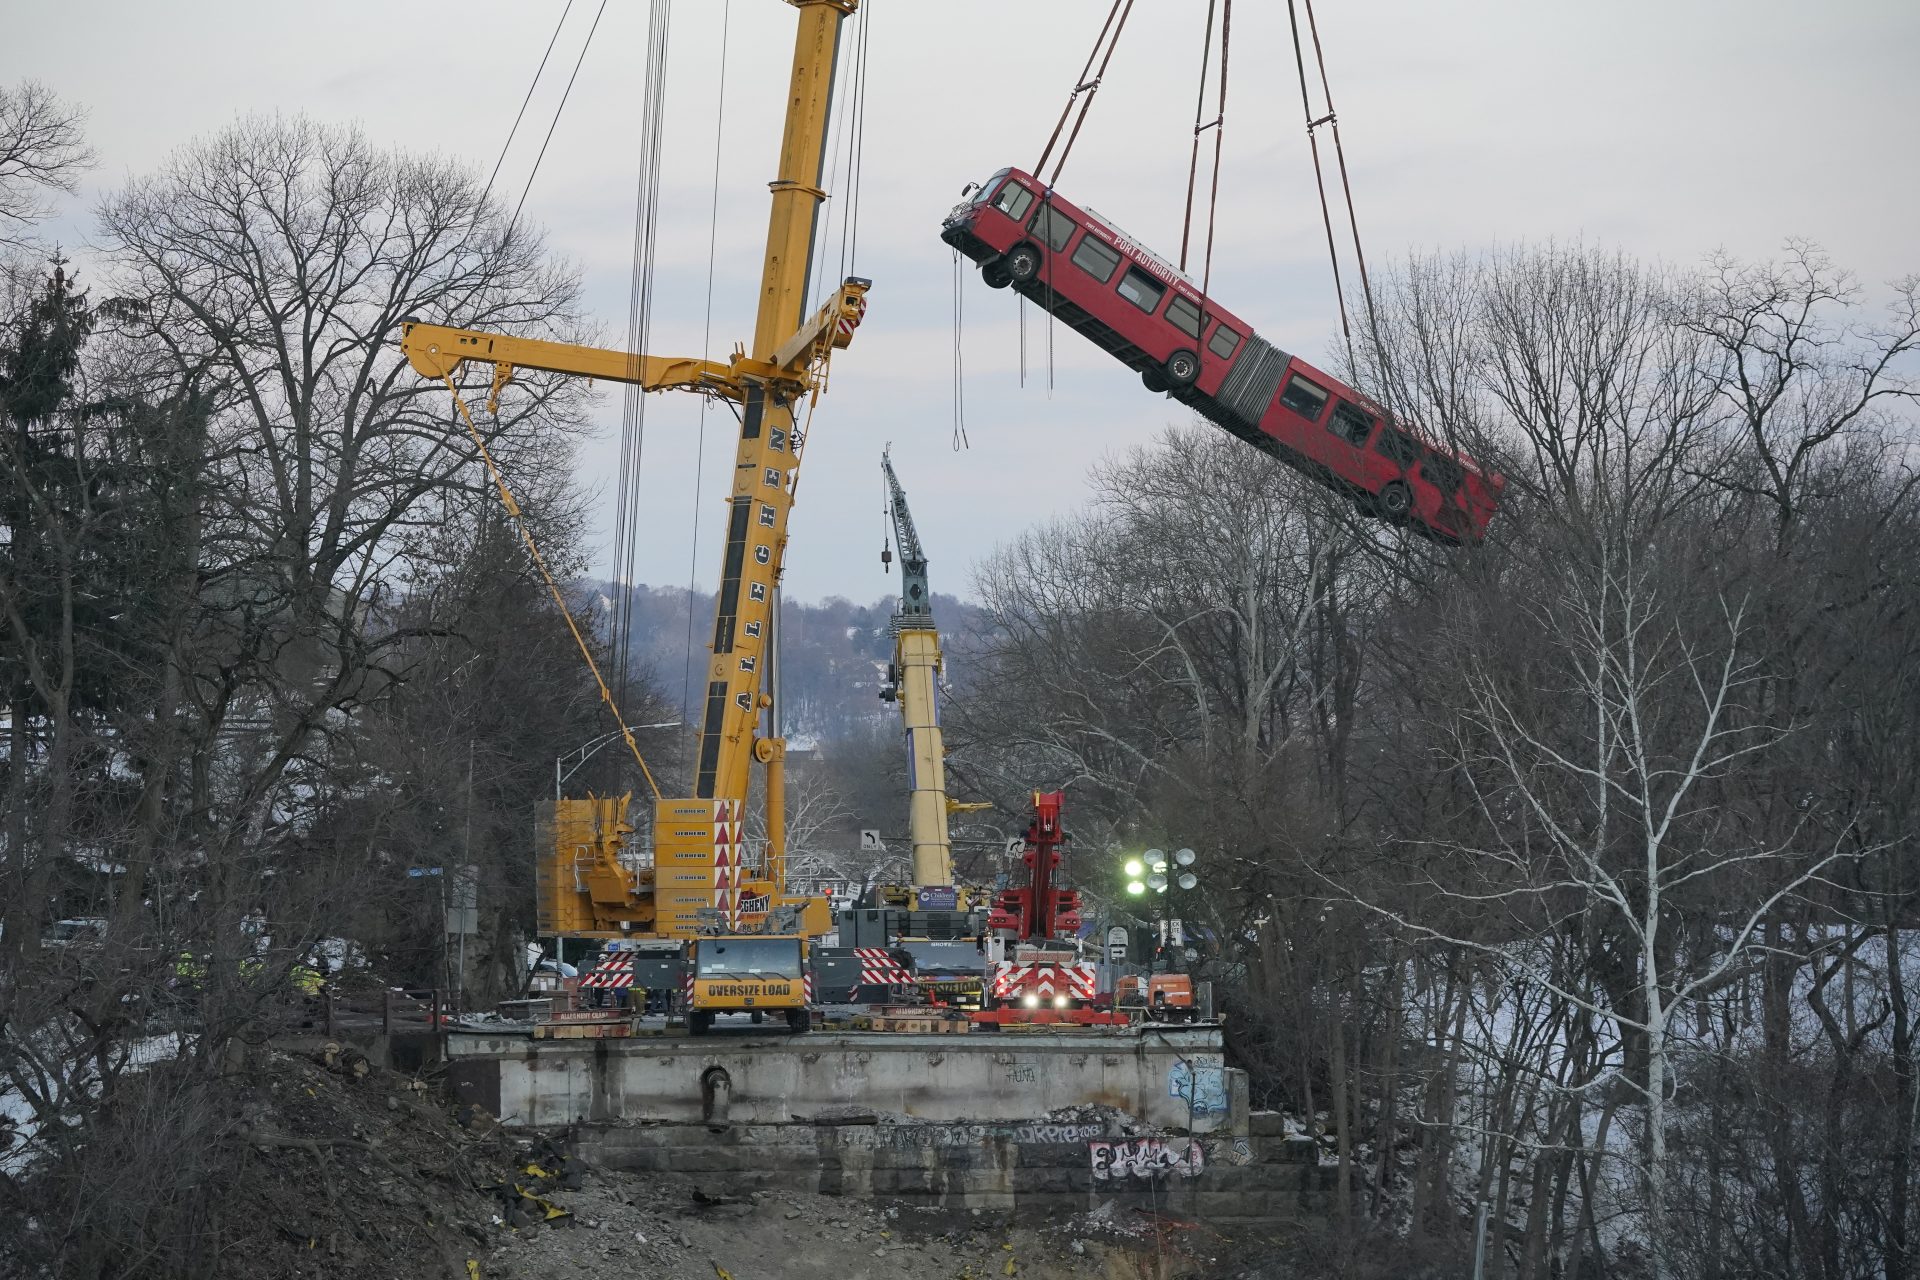 A crane hoists a Pittsburgh Transit Authority bus on Monday Jan. 31, 2022, that was trapped on the Fern Hollow Bridge when it collapsed on Jan 28, 2022.